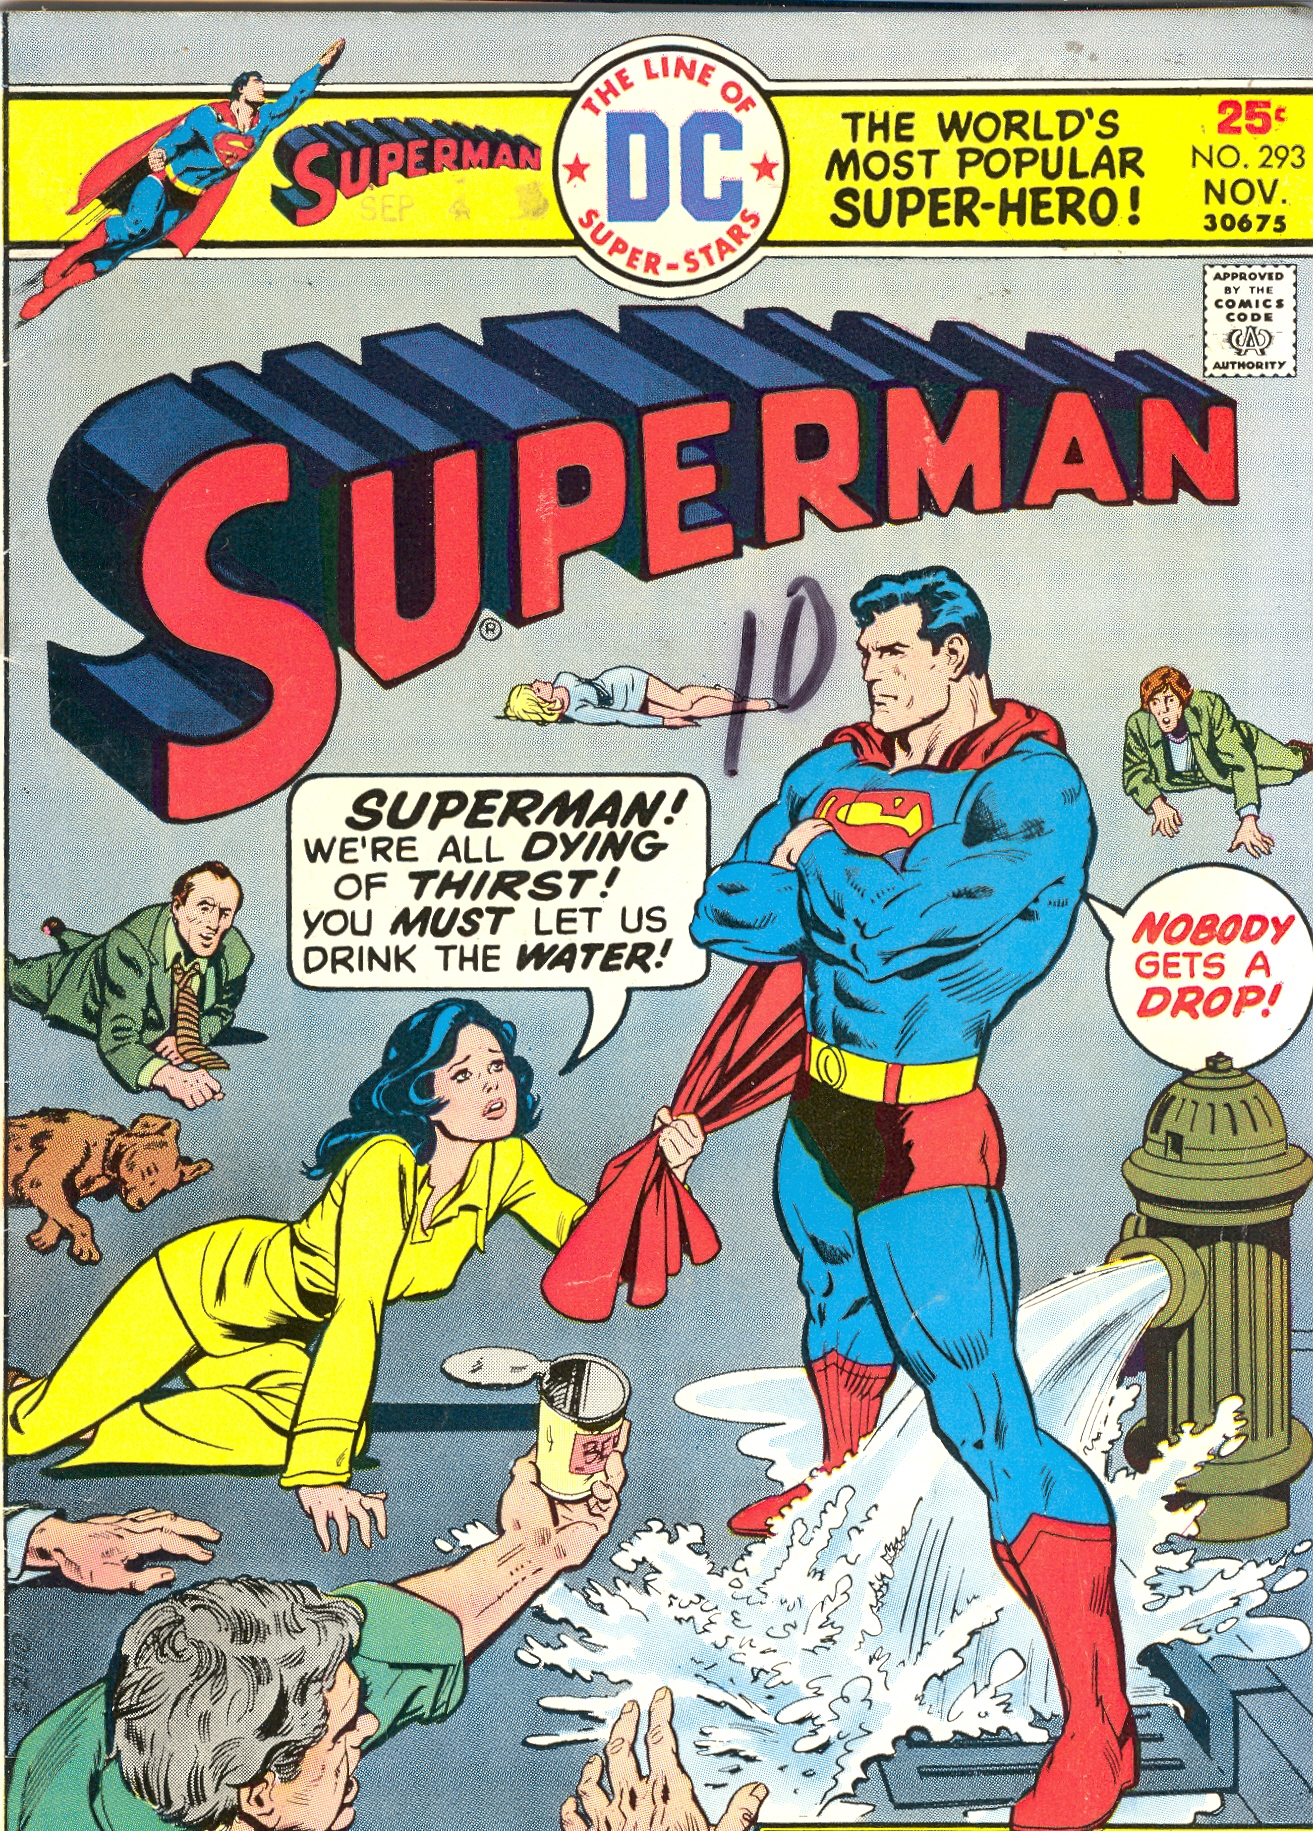 Crazy Comic Covers: Superman #293;The miracle of Thirsty Thursday